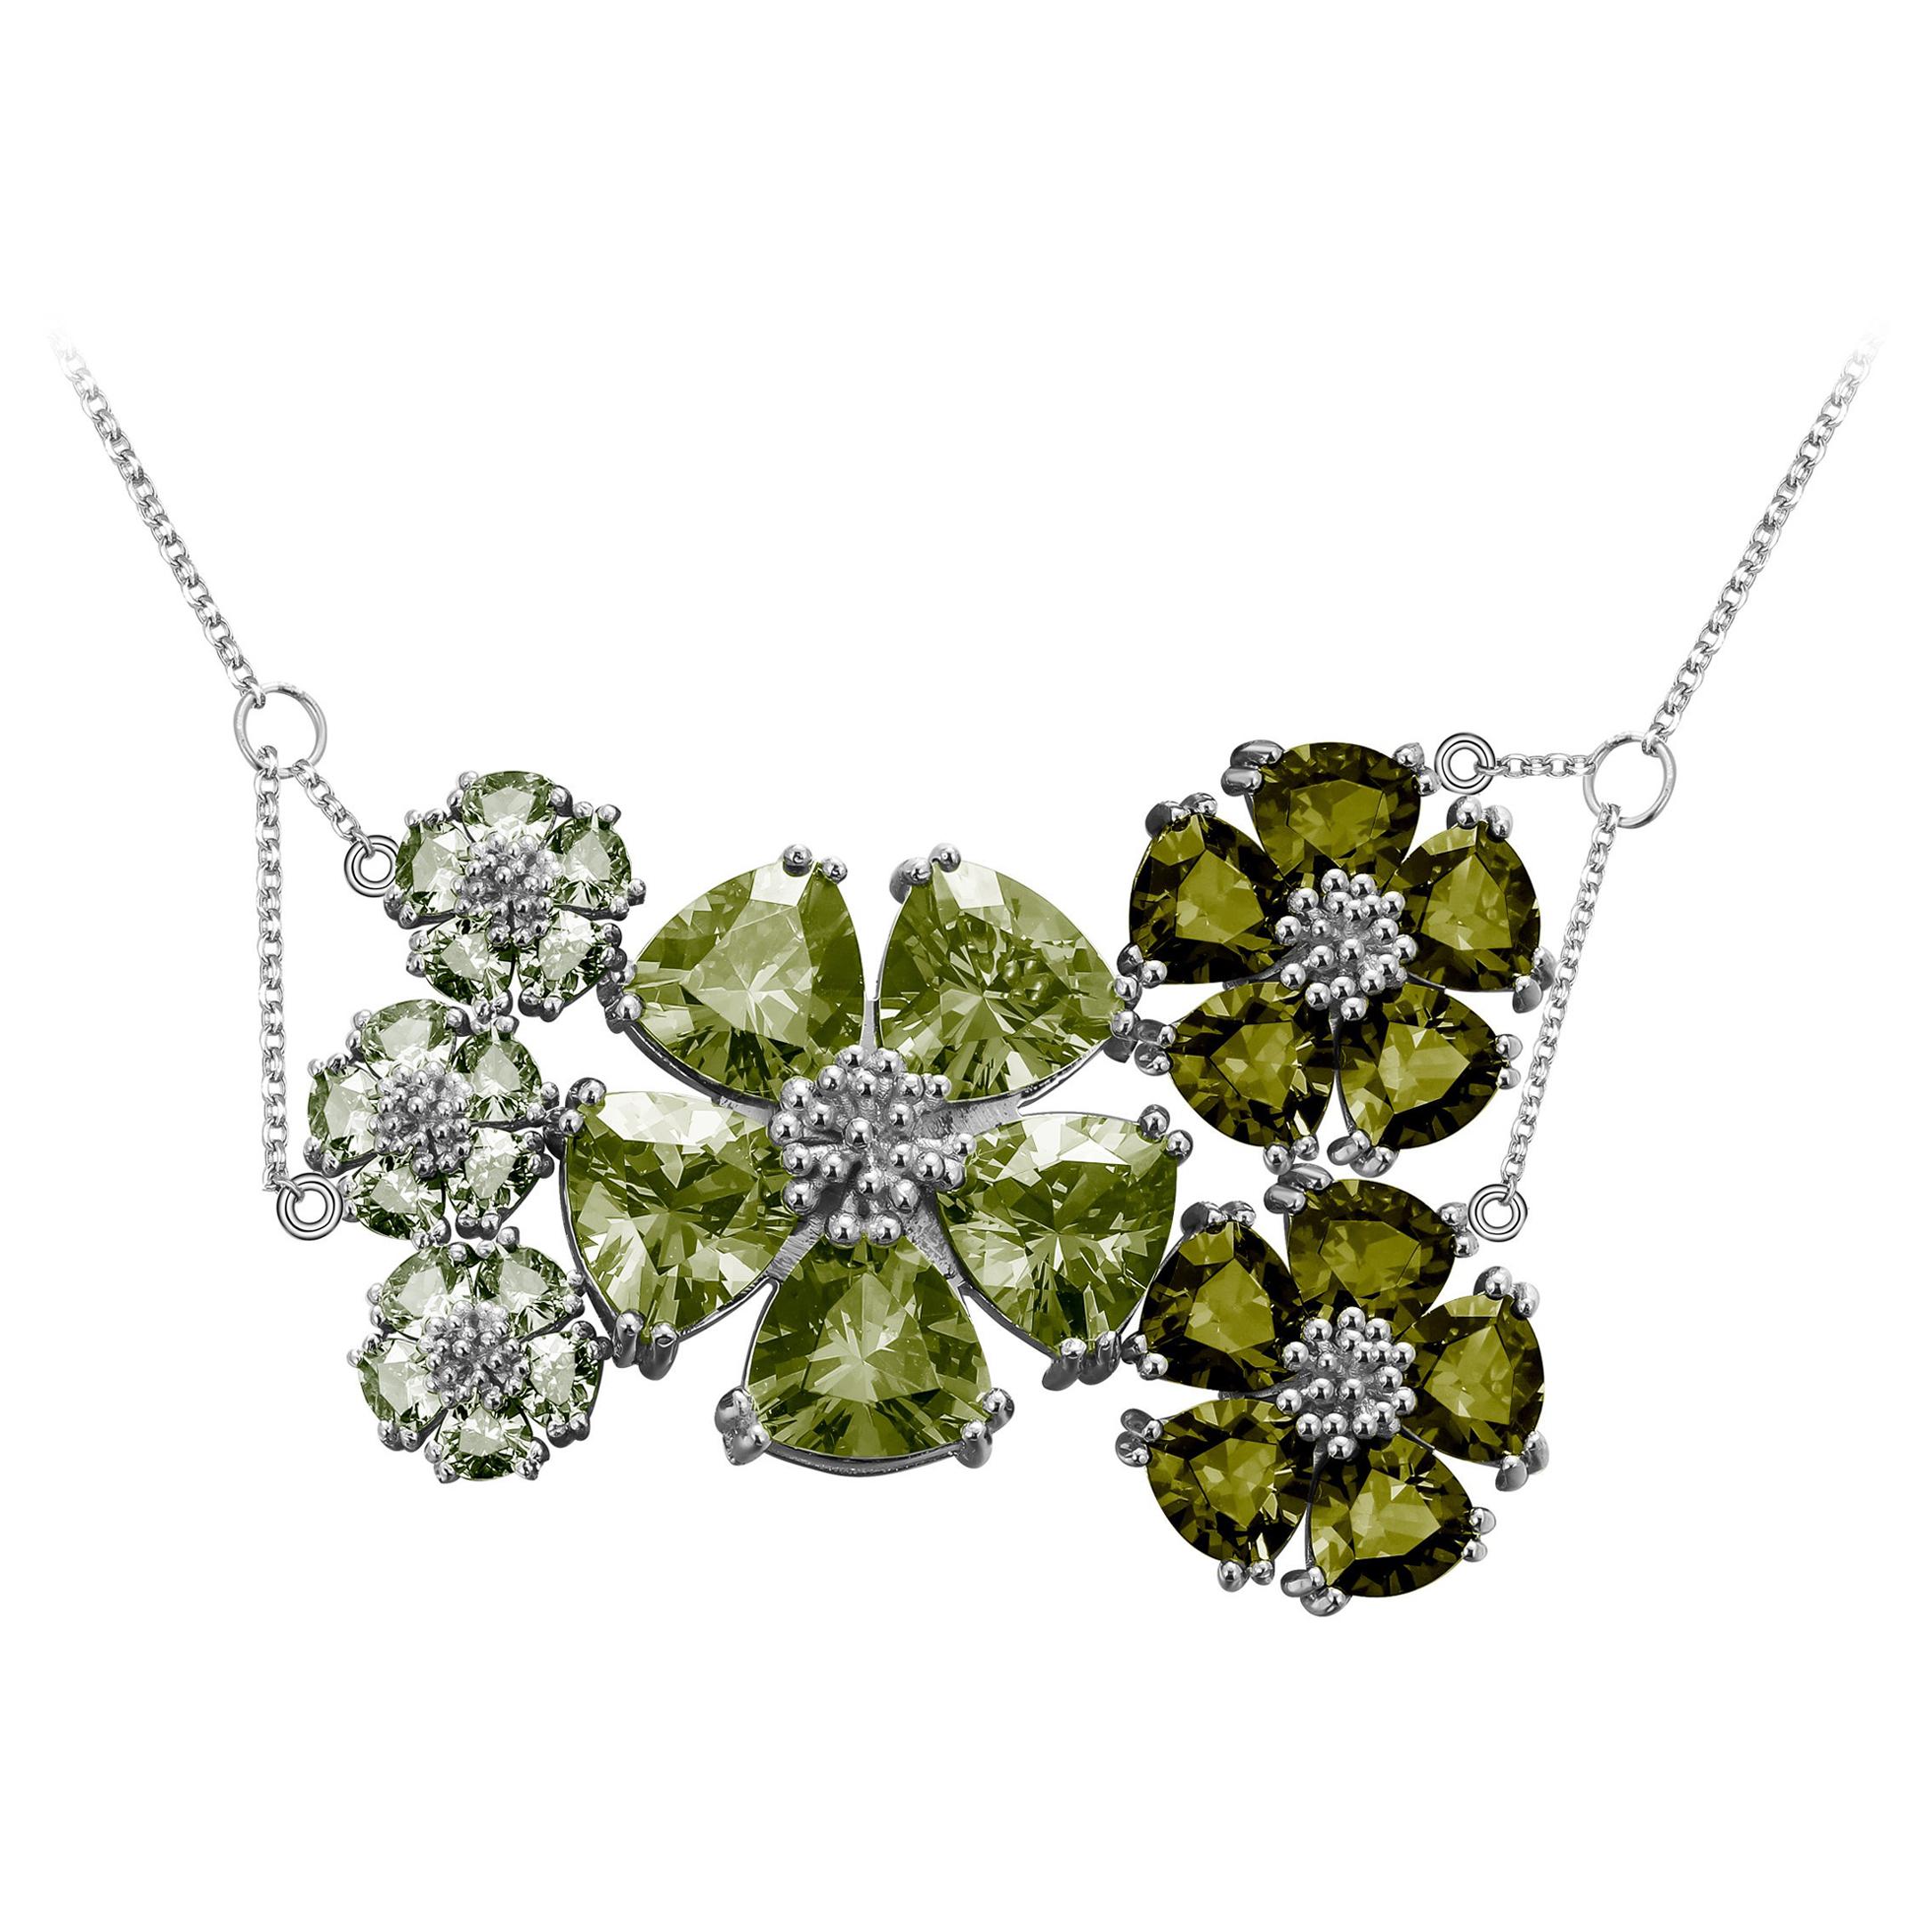 Mixed Green Amethyst Blossom Renaissance Necklace For Sale